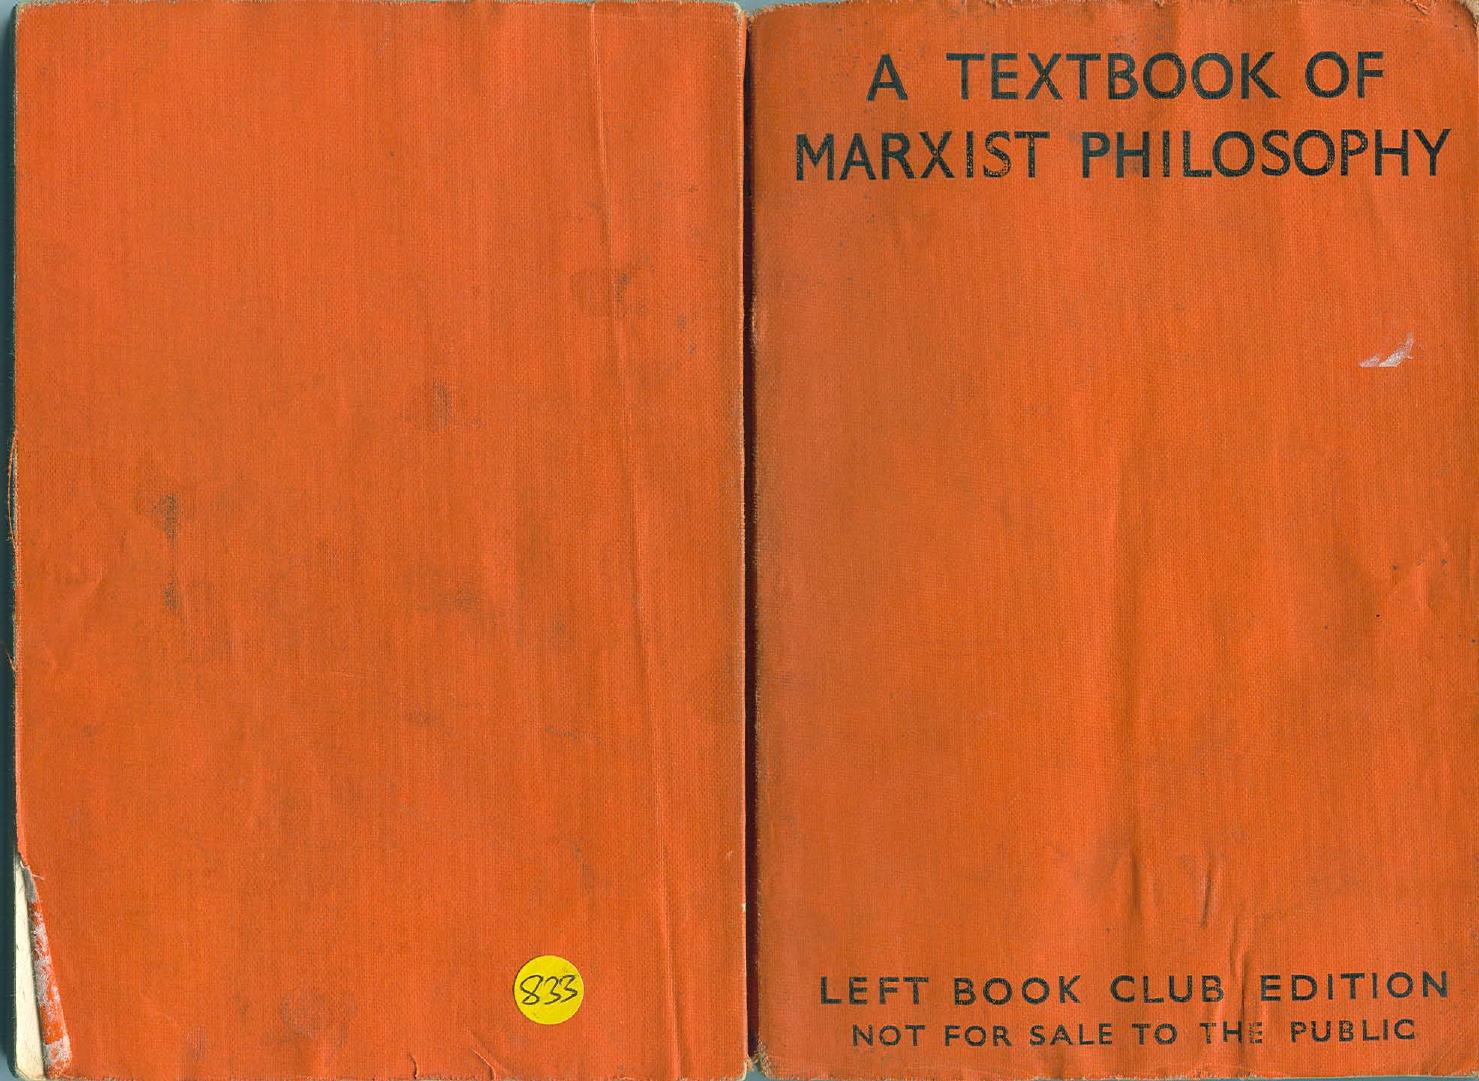 A Textbook Of Marxist Philosophy by Leningrad Institute Of Philosophy